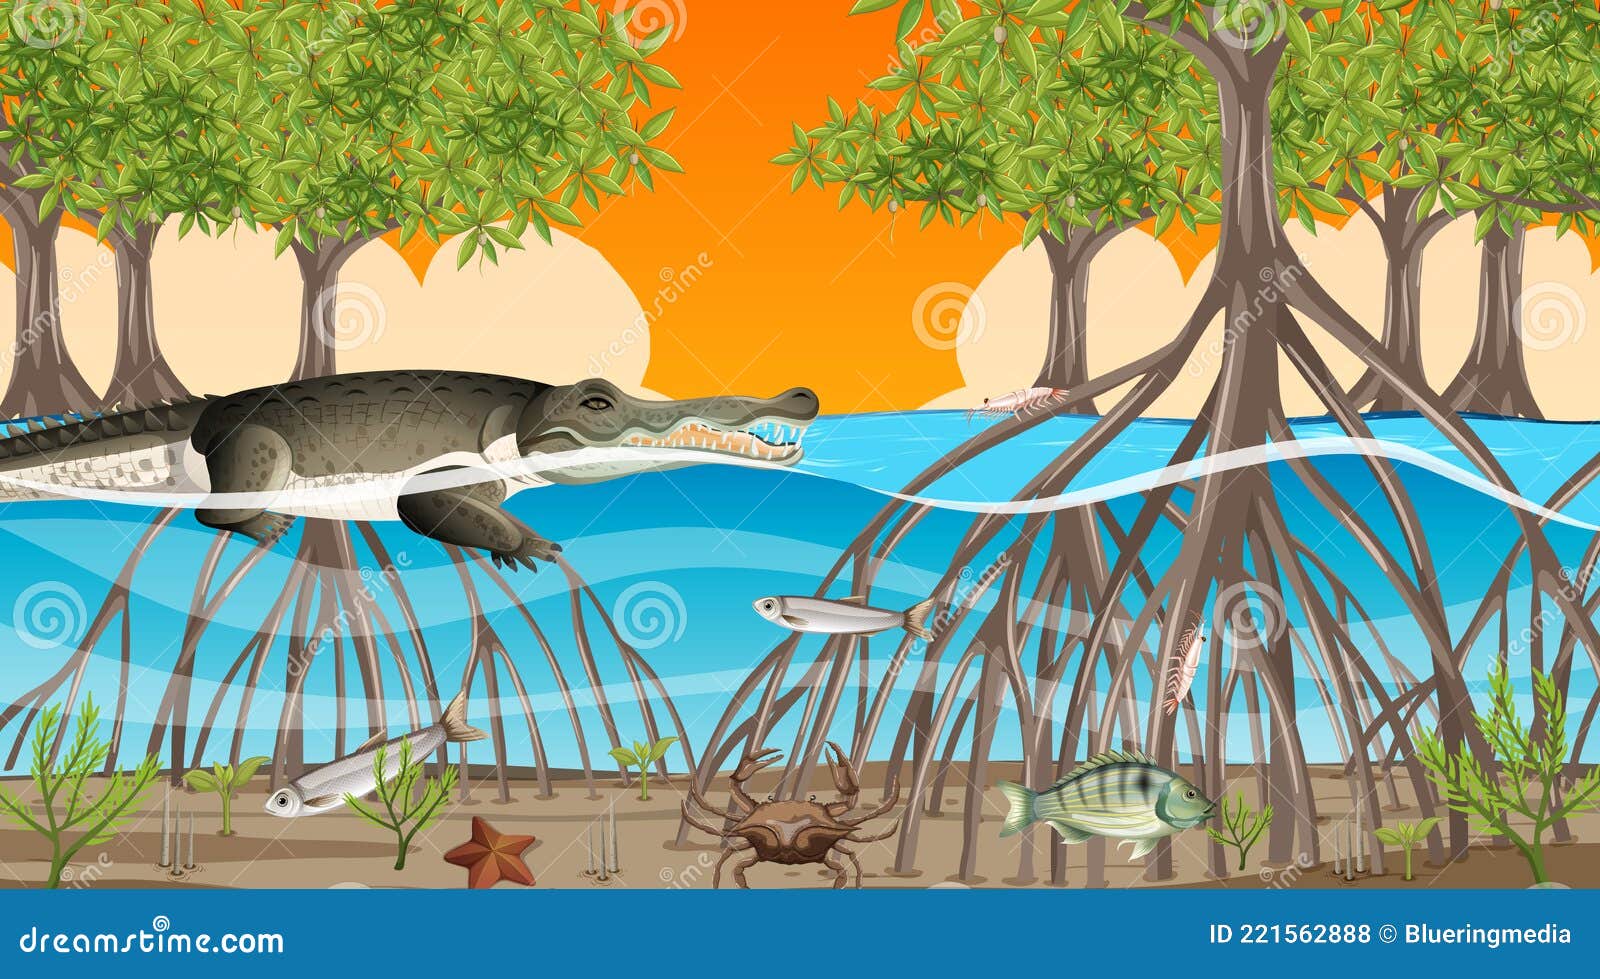 Animals Live in Mangrove Forest at Sunset Time Scene Stock Vector -  Illustration of fresh, outdoor: 221562888